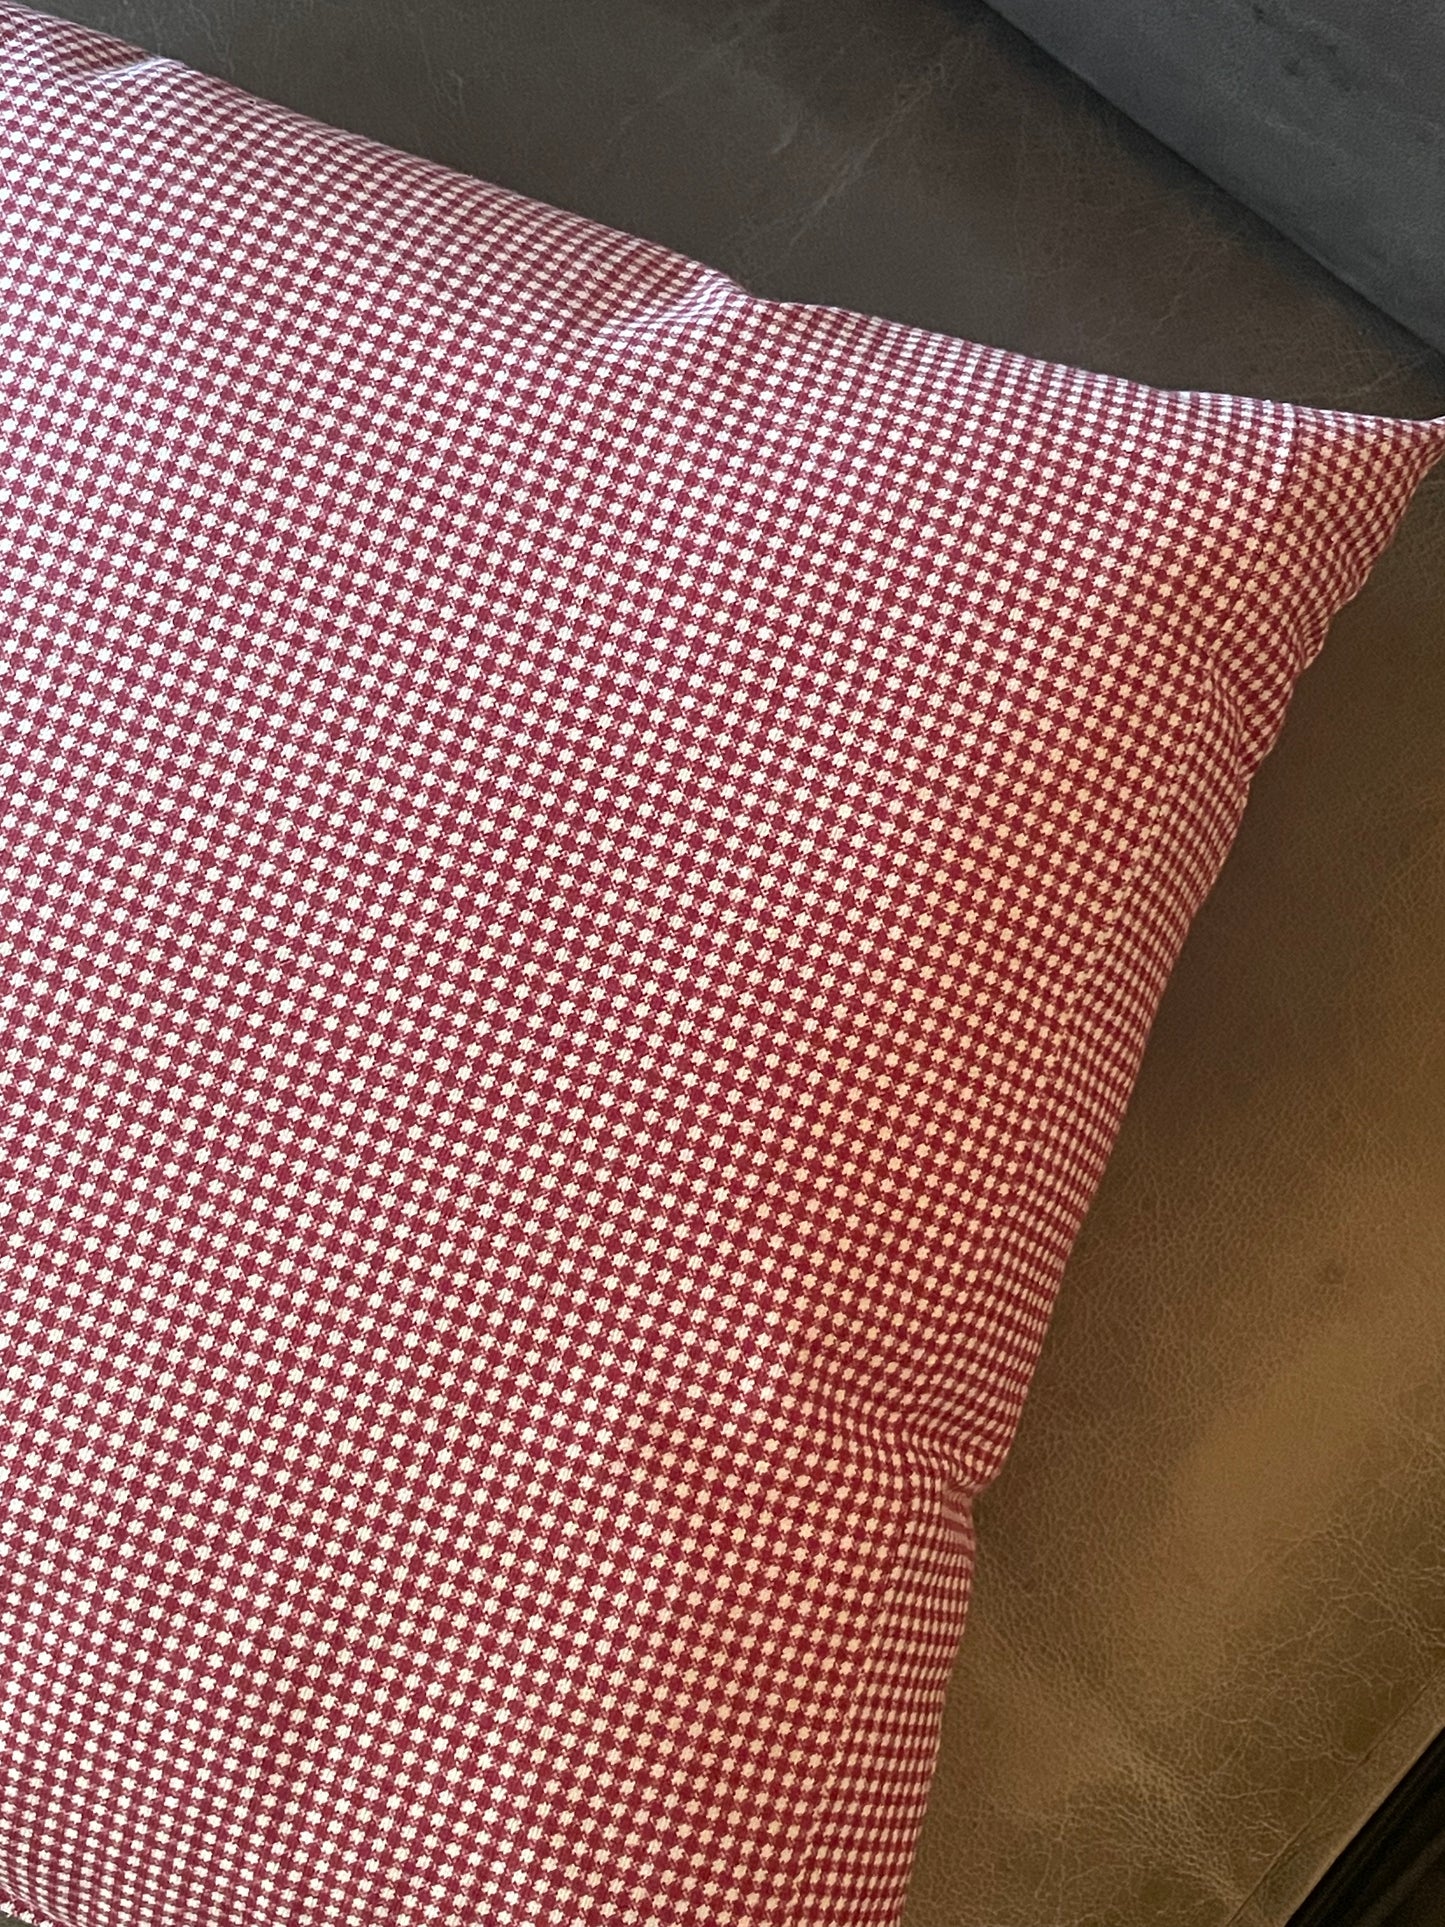 French Check Red and White Handsewn Accent Pillow